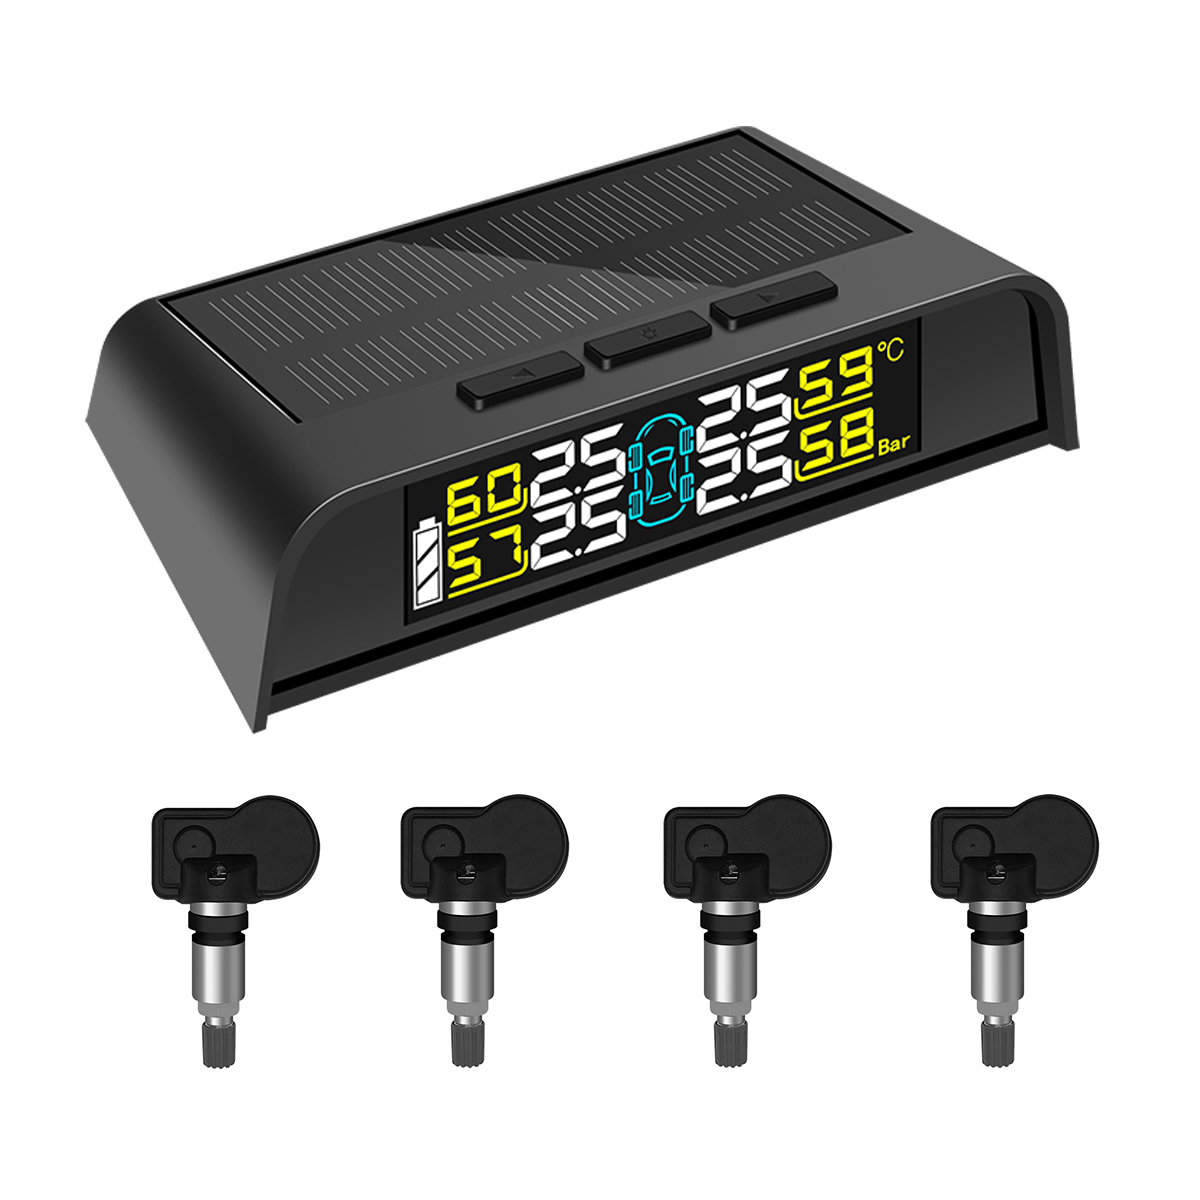 High-Quality OEM Tire Monitor System Manufacturers Pricelist –  Wired TPMS For cars Tire pressure monitoring system with Japanese battery,stable performance  – Minpn